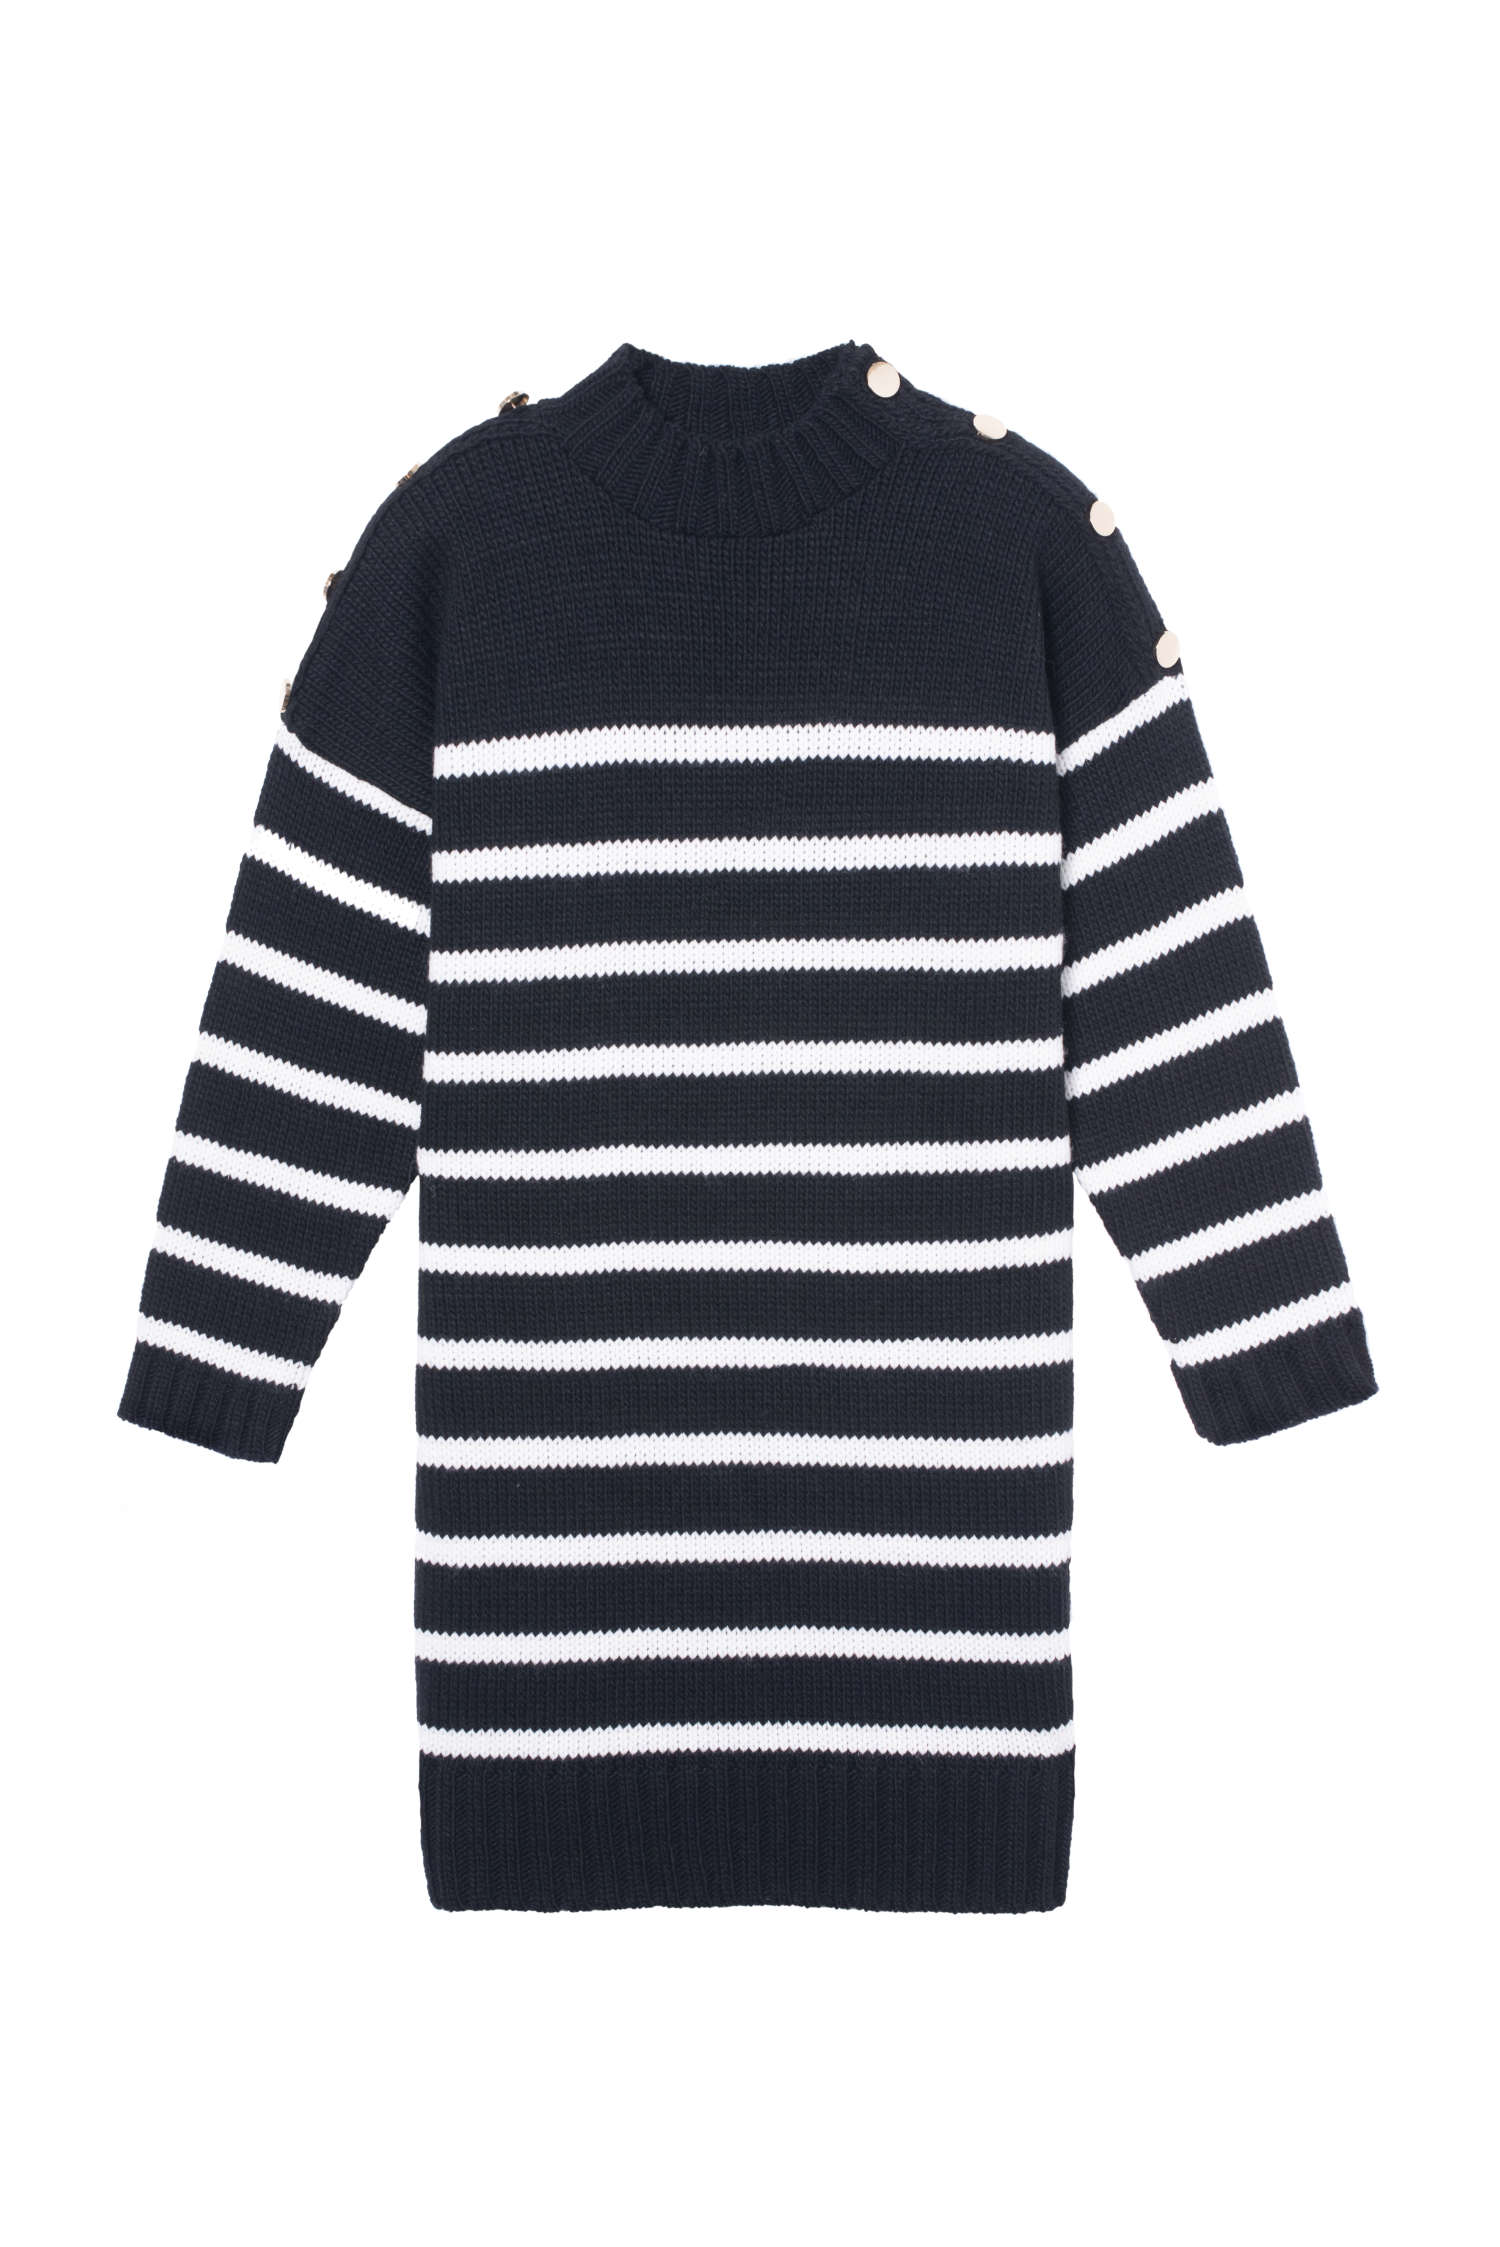 Parisienne et Alors Navy and White Stripe Sweater